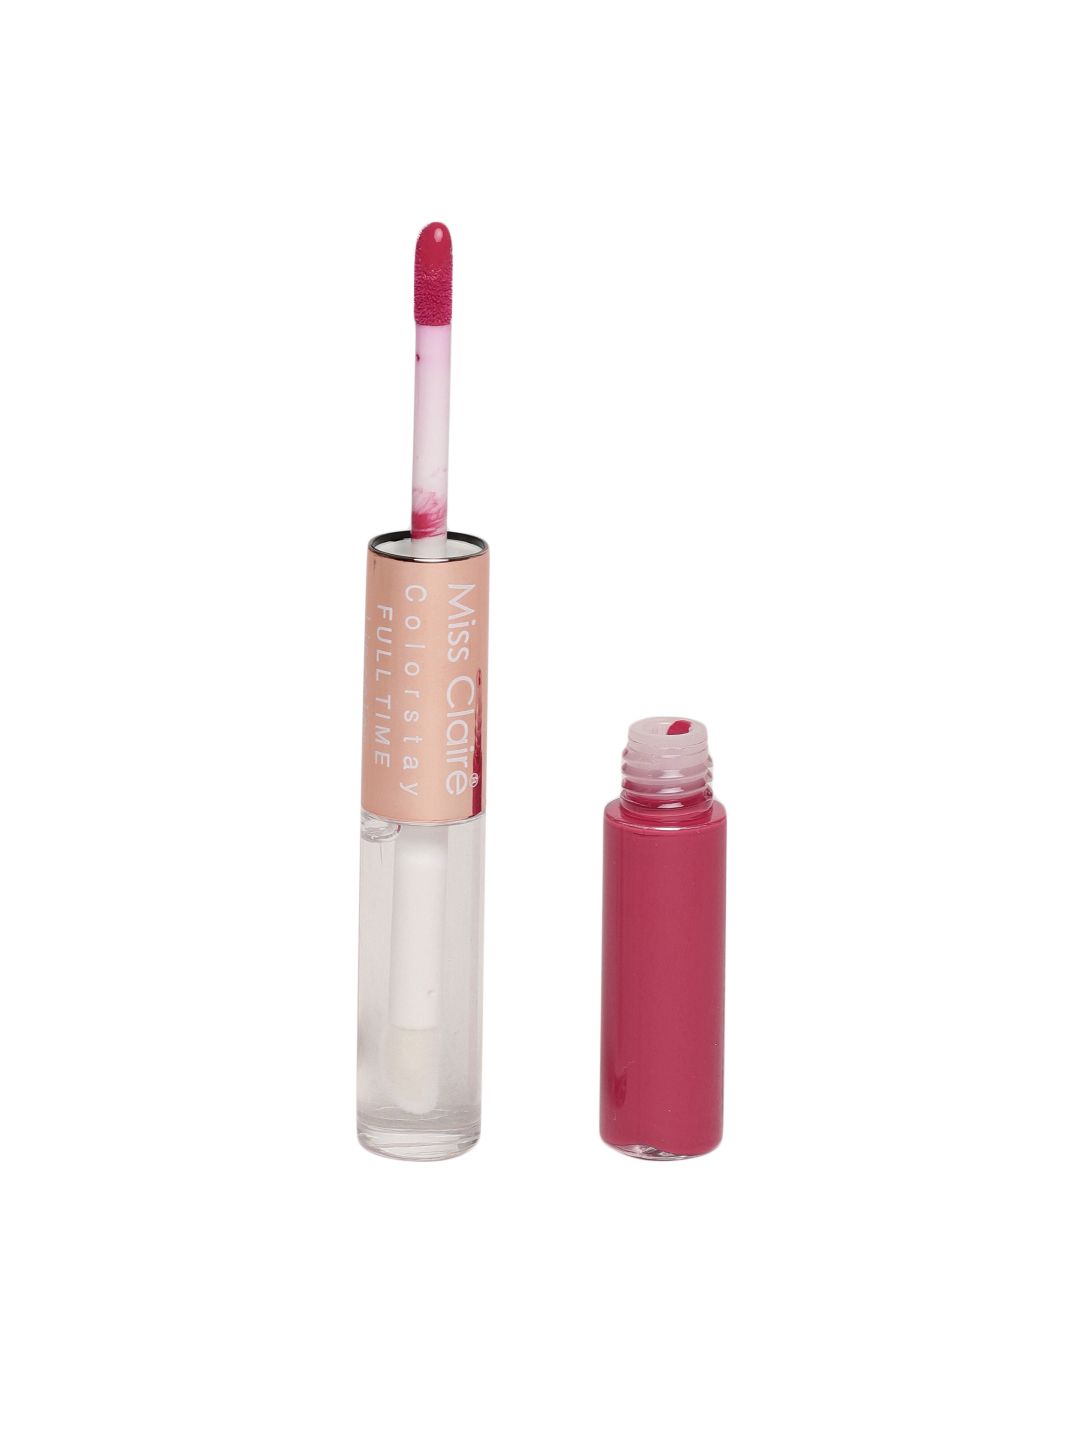 Miss Claire 27 Colorstay Full Time Lipcolor 10ml Price in India